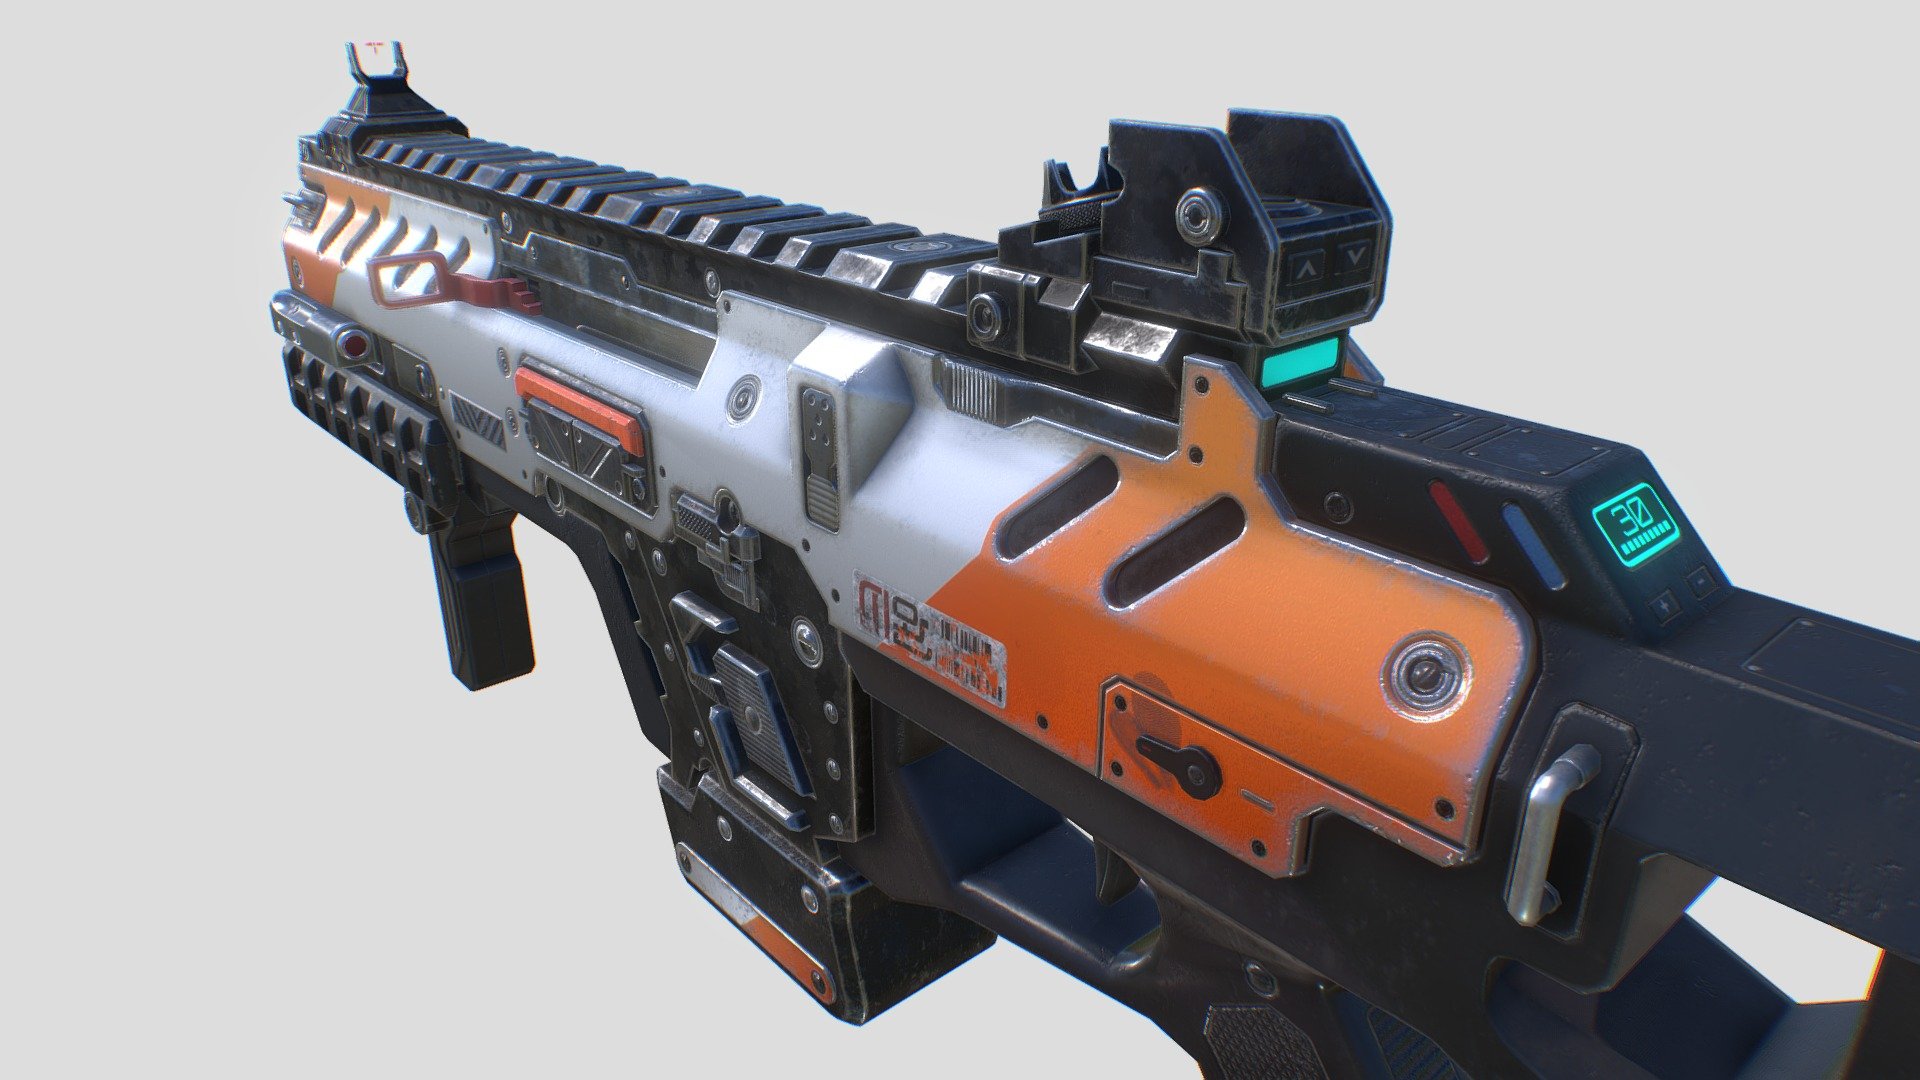 I Modeled this SMG Fanart according to concept art
It tooks 3 weeks.
hmm, I'm so slow like a snail right now&hellip;🐌🐌 - Titanfall2 CAR SMG - 3D model by AX-7YK 3d model